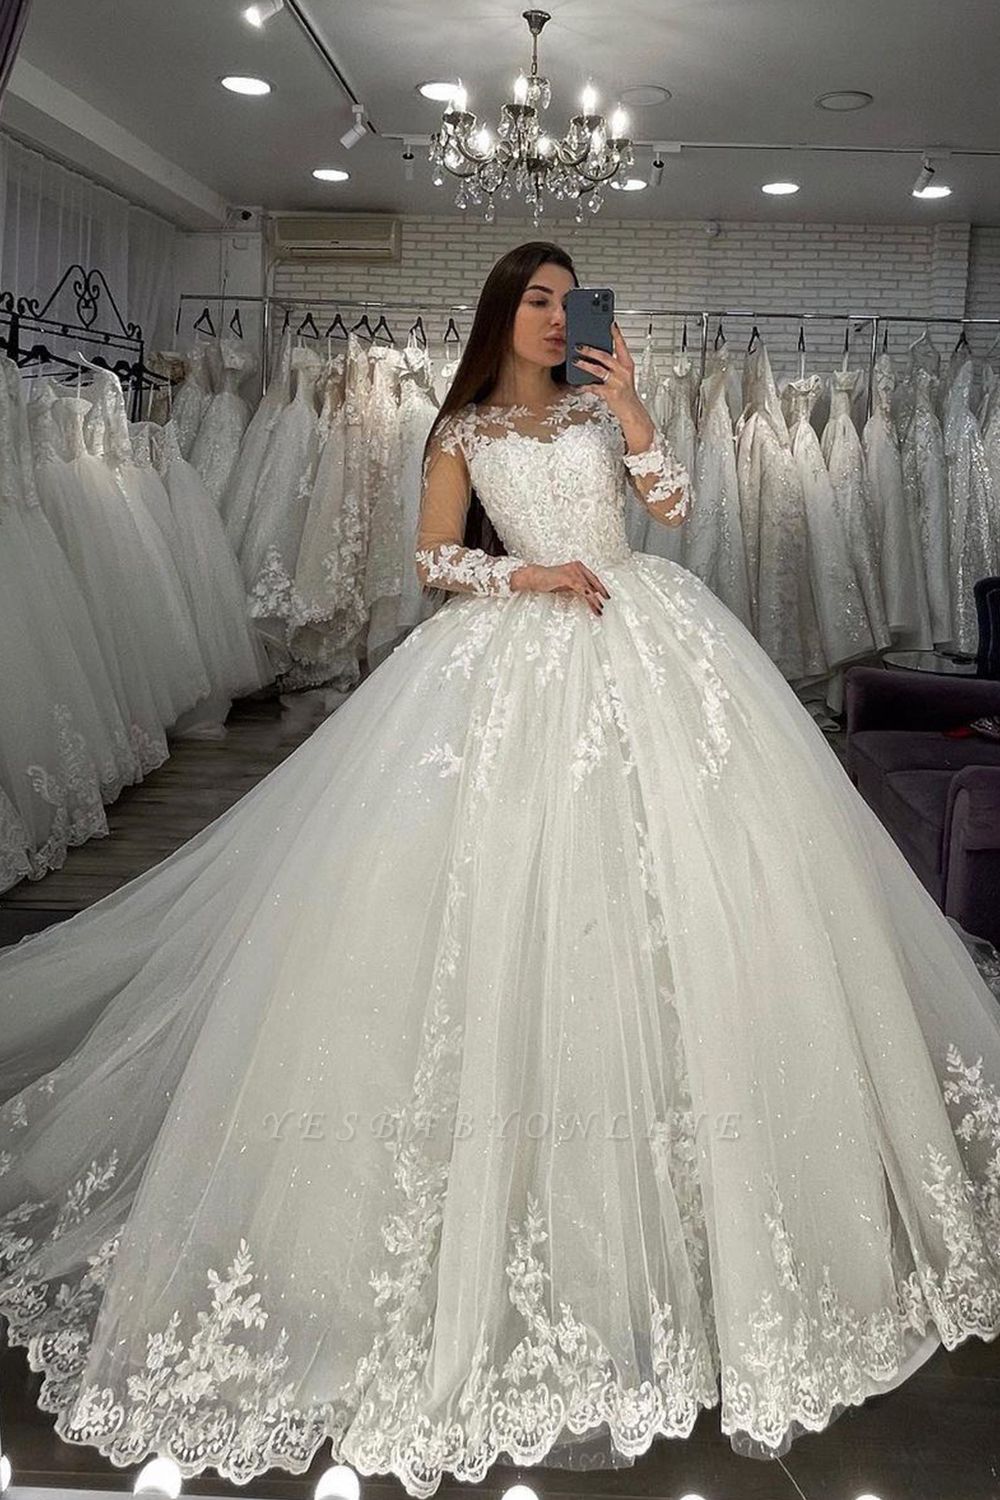 Long Sleeves Lace Appliques Tulle White Wedding Gowns | Yesbabyonline.com